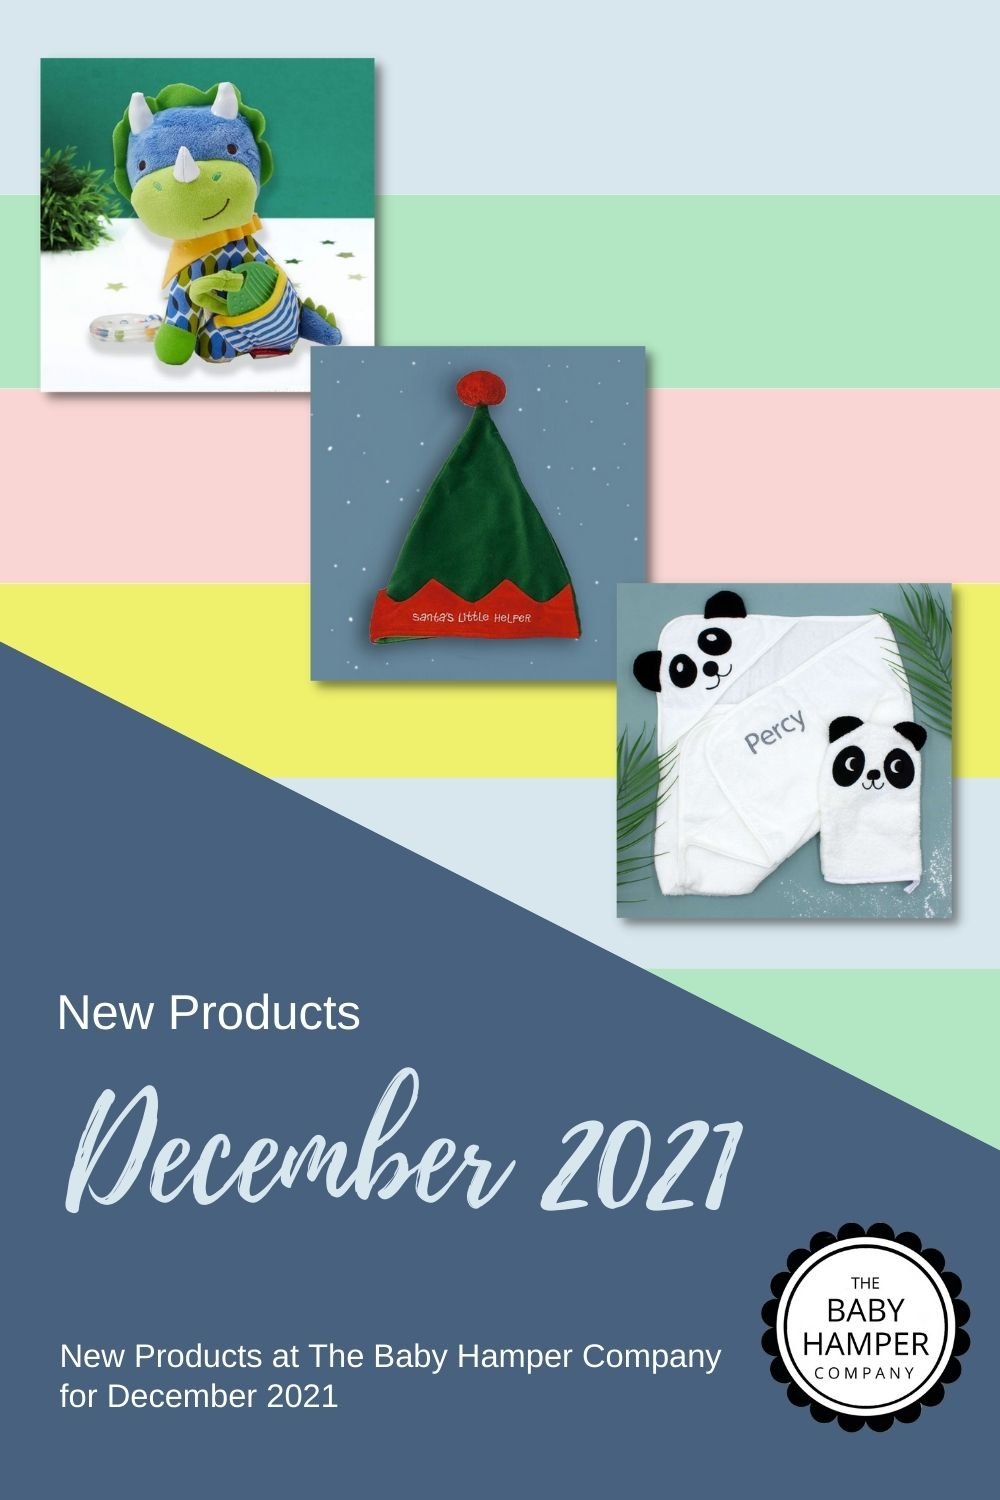 New Products at The Baby Hamper Company for December 2021